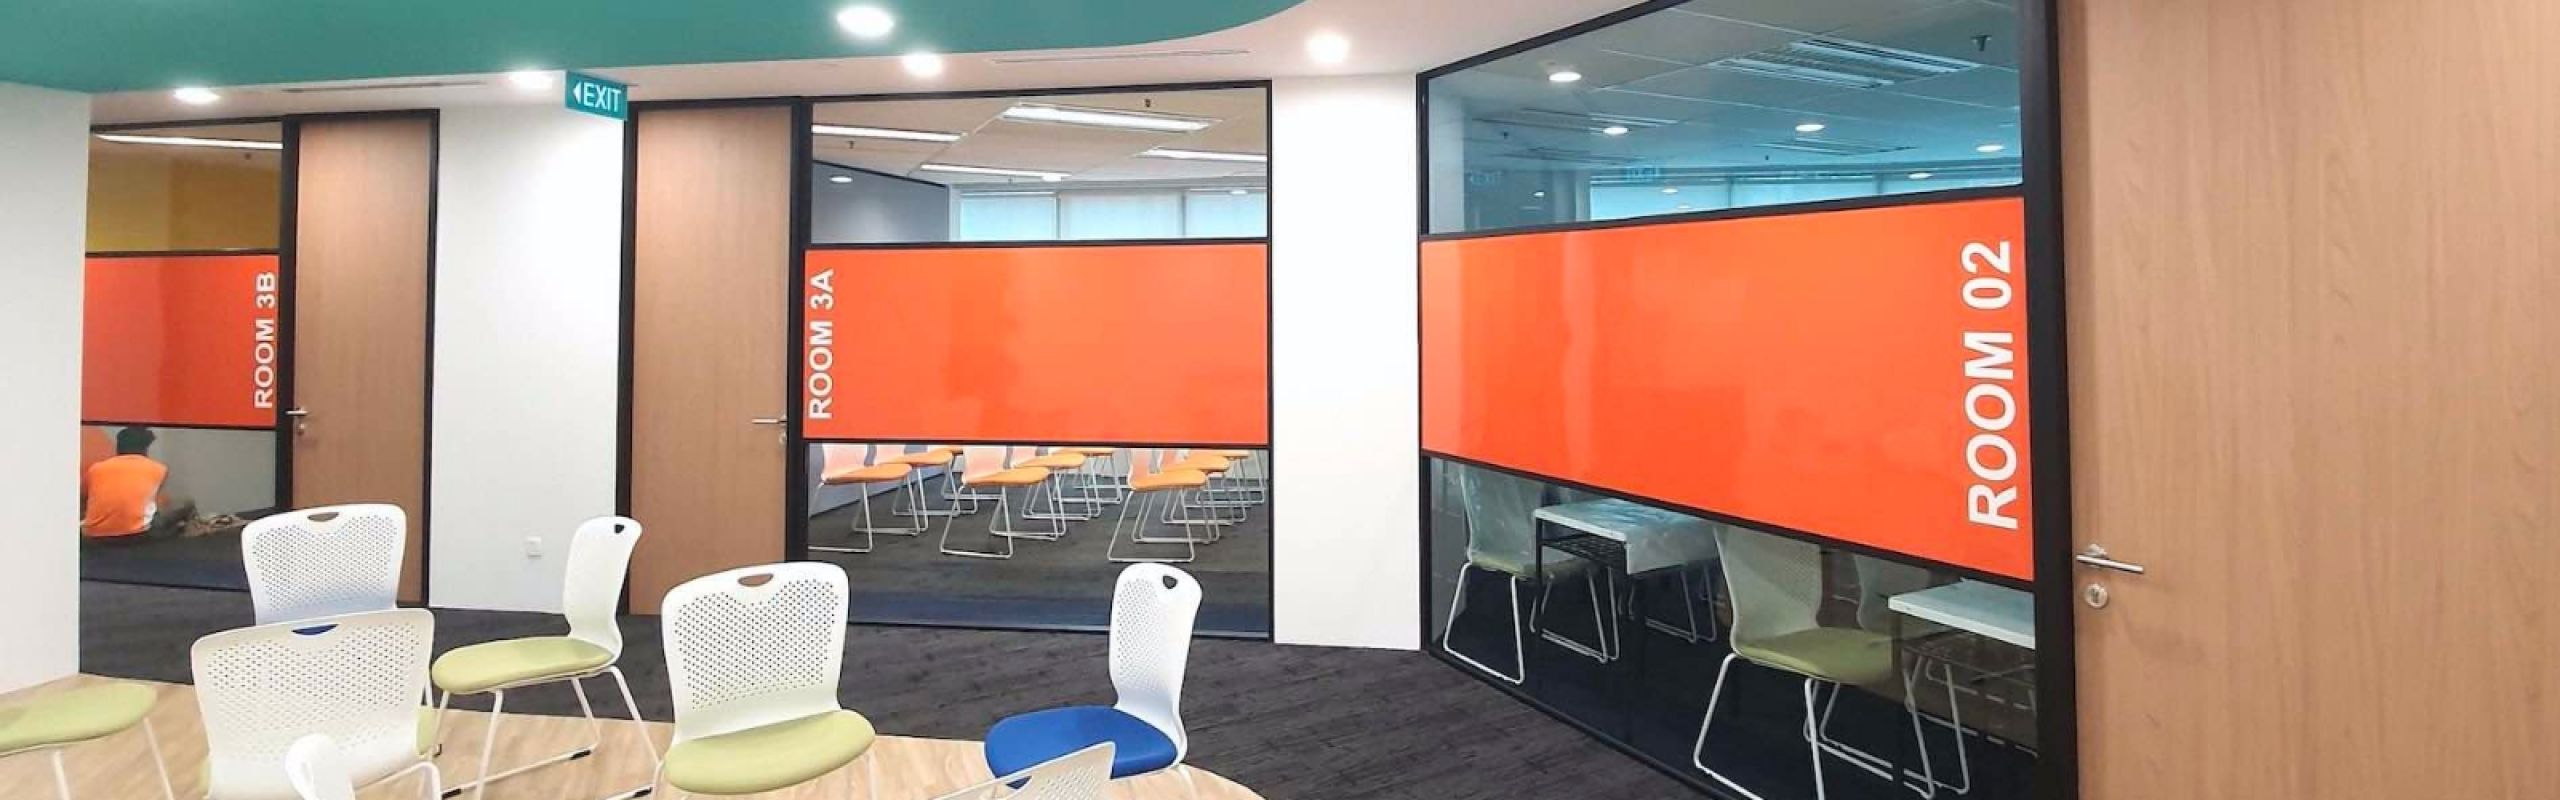 Acoustic Glass Partitioning for a Learning Institution - Cover